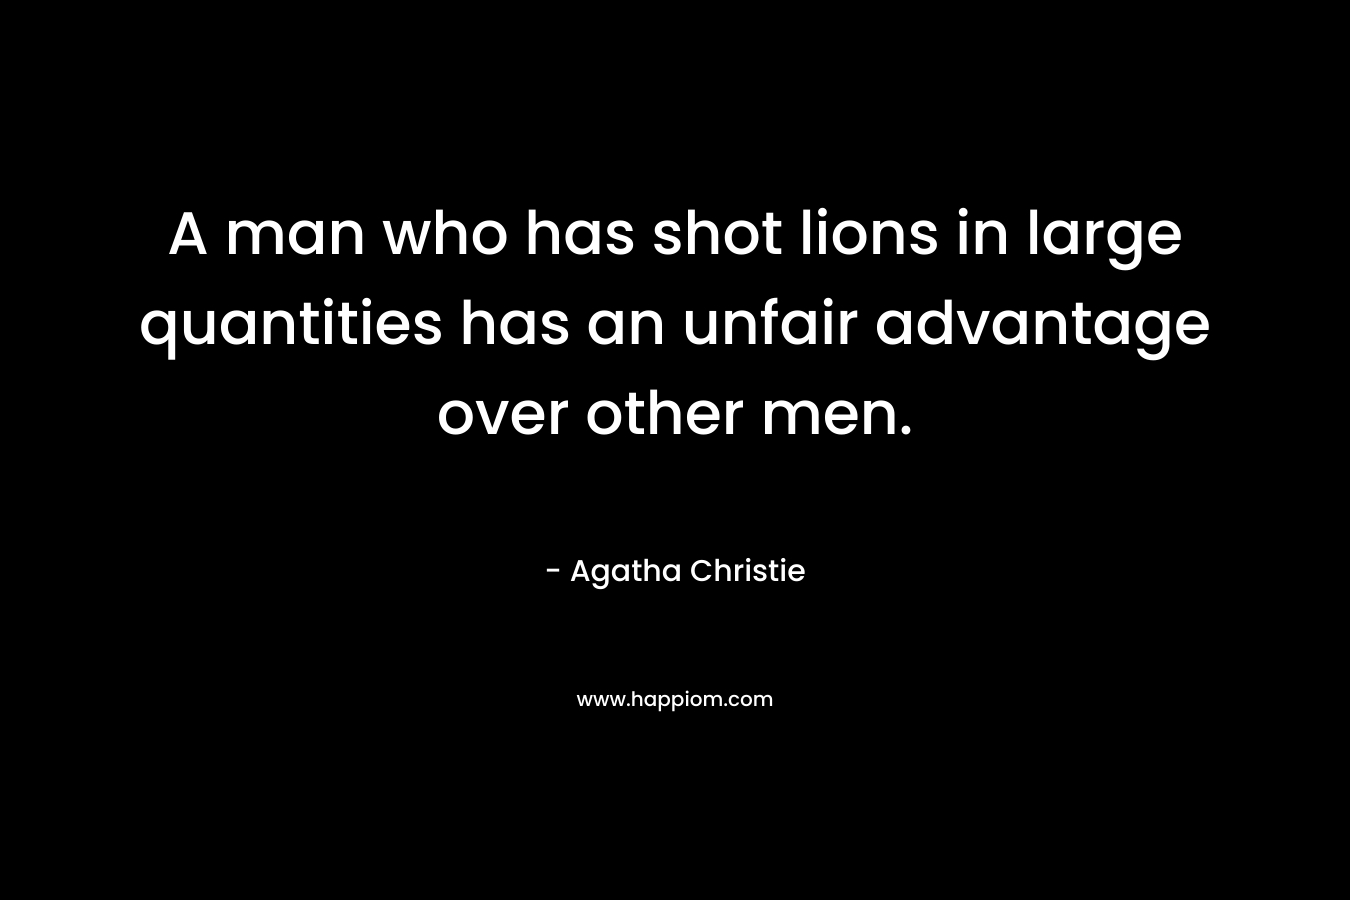 A man who has shot lions in large quantities has an unfair advantage over other men.